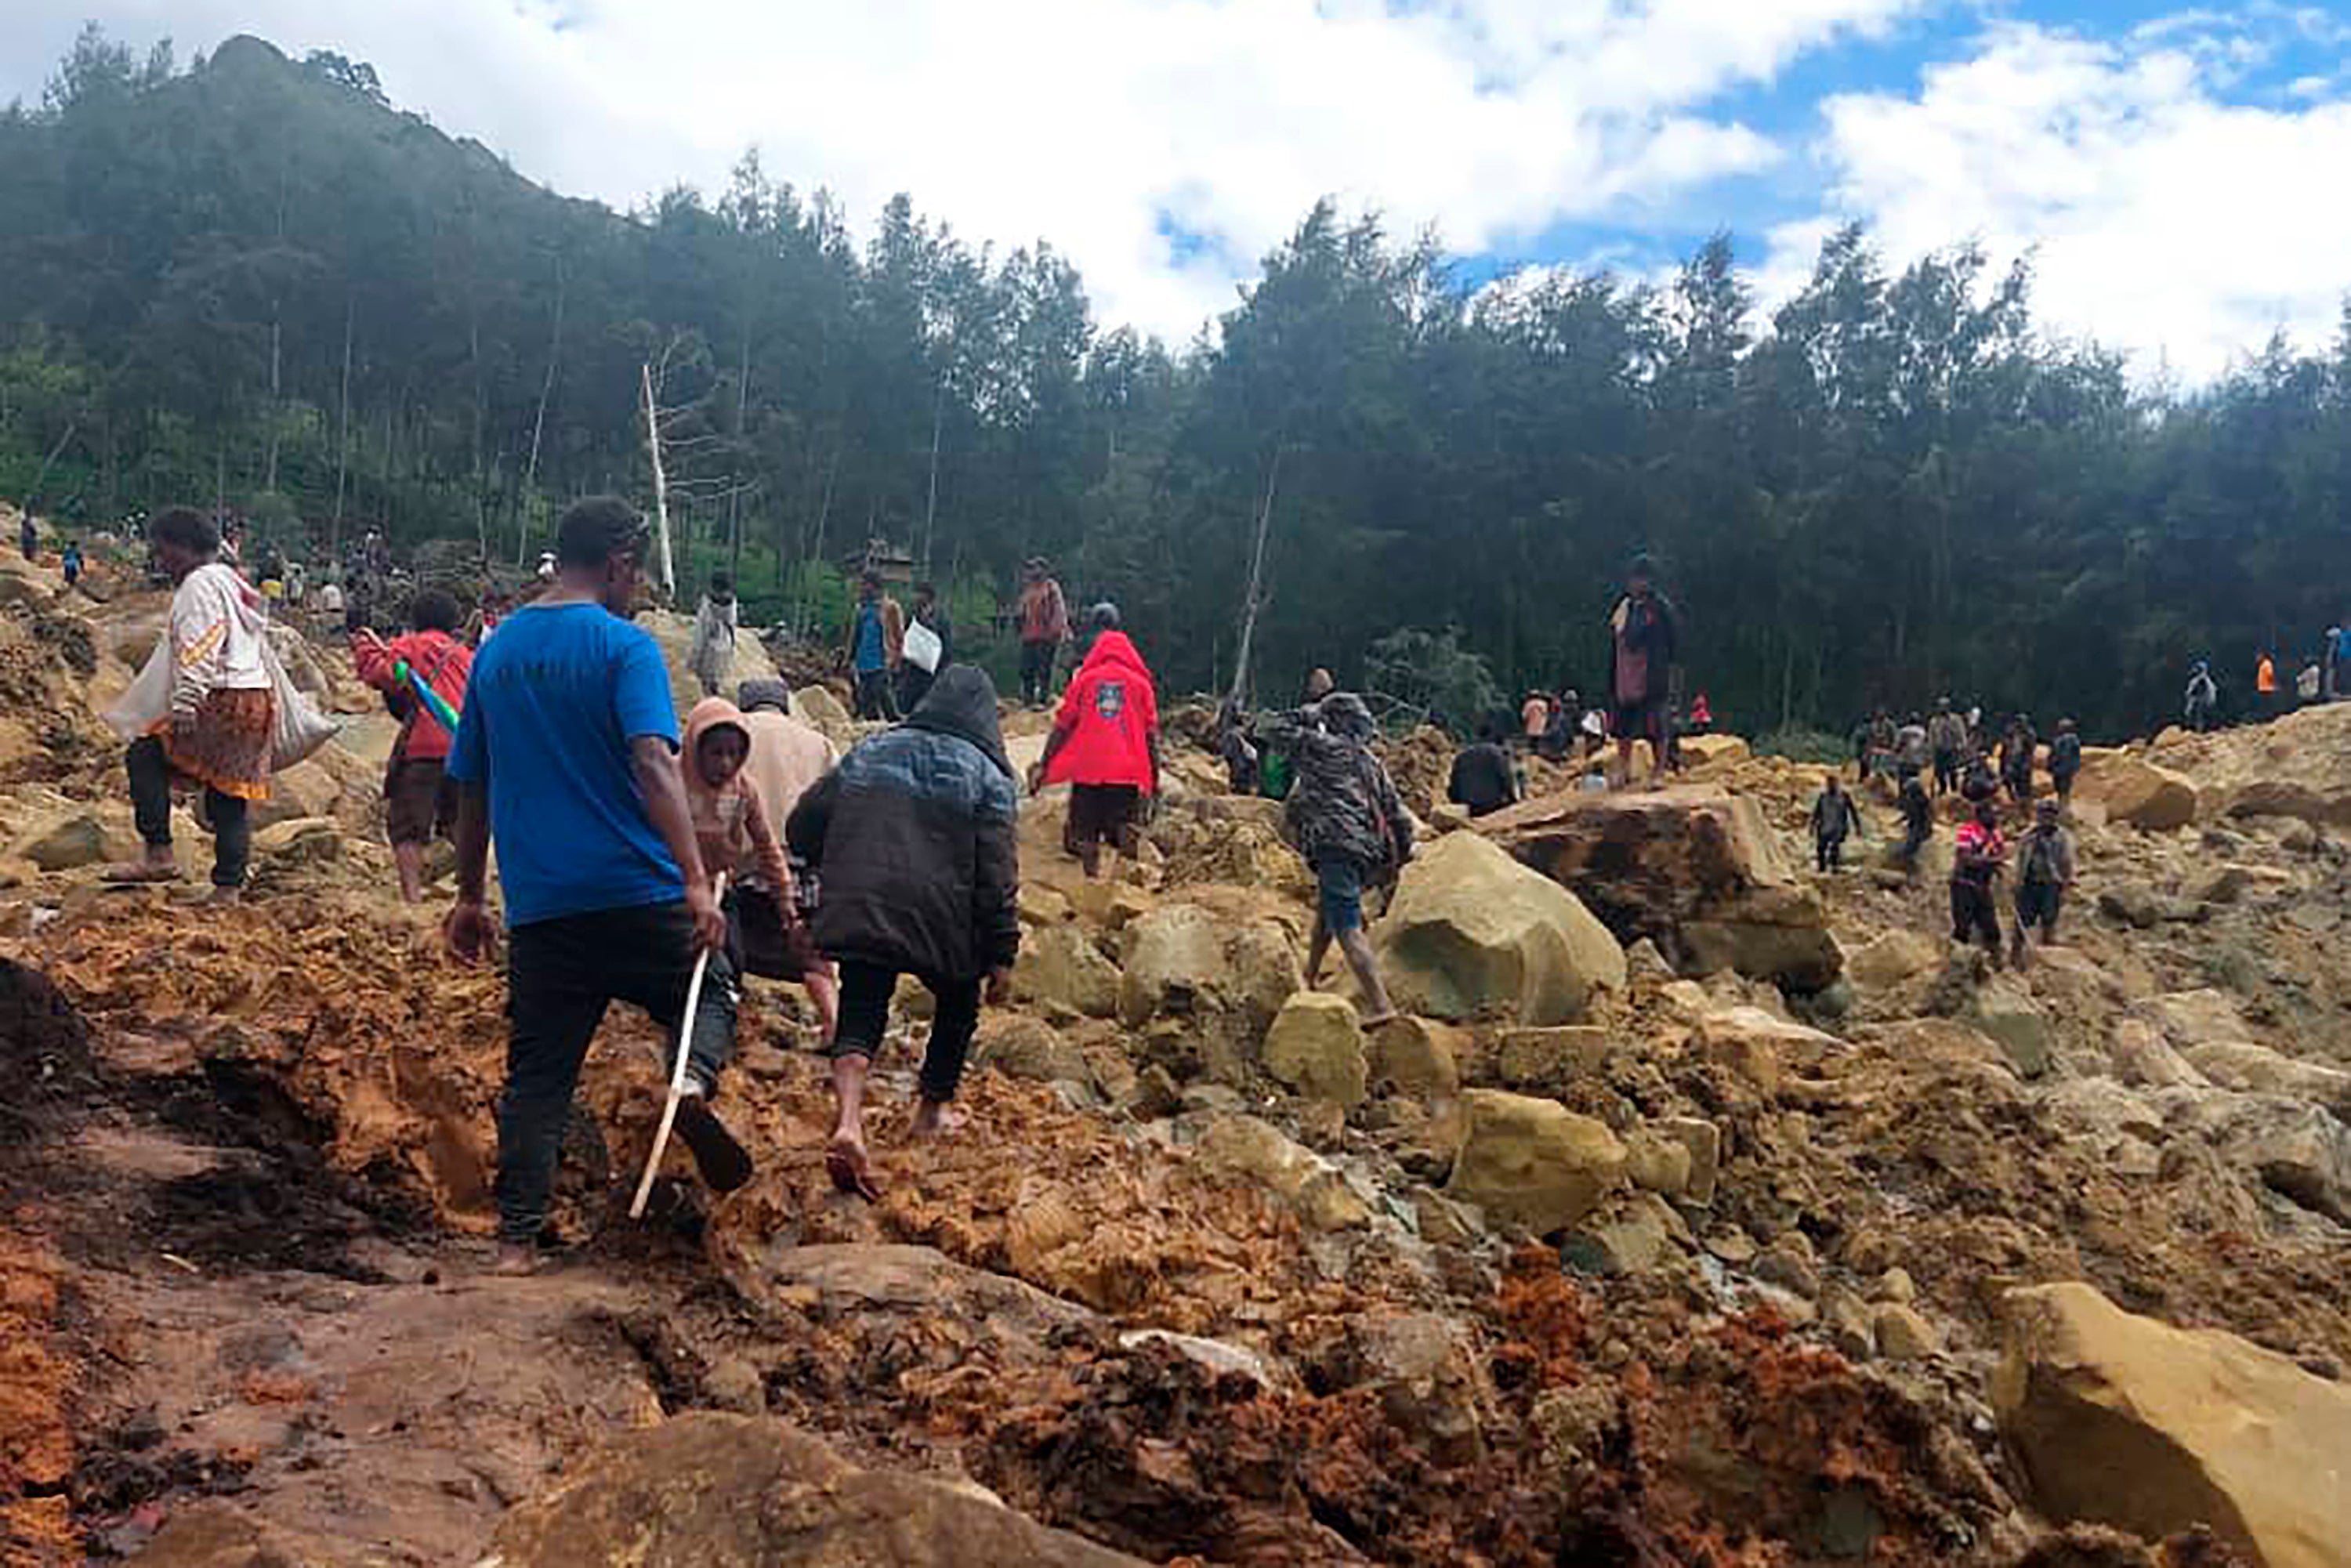 People cross over landslide area in Yambali village, Papua New Guinea